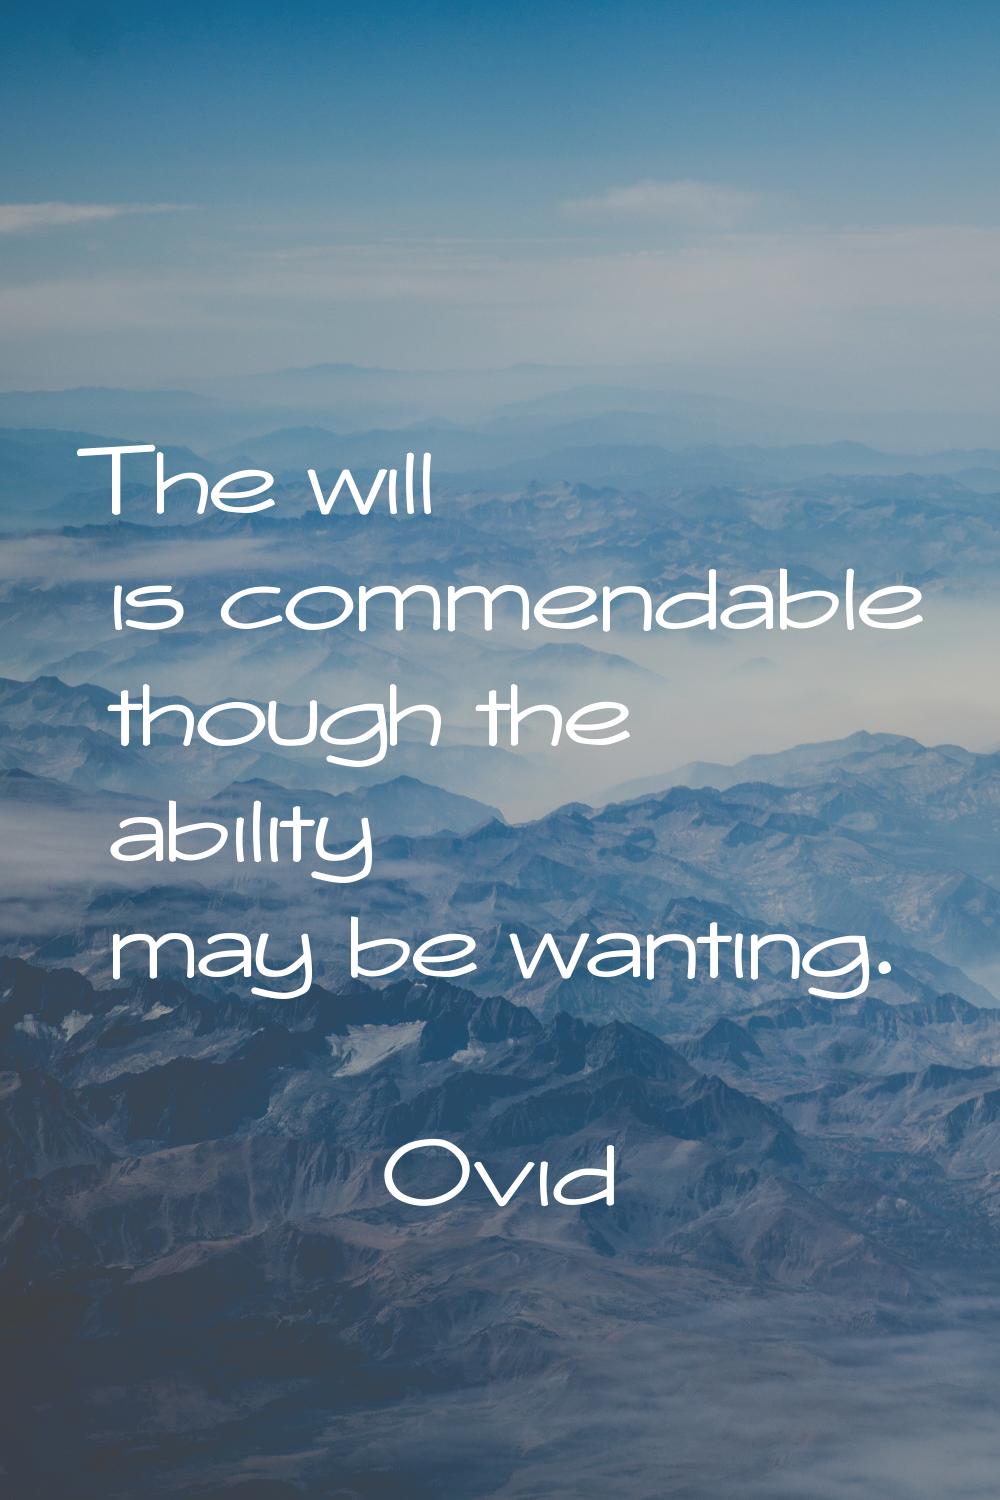 The will is commendable though the ability may be wanting.